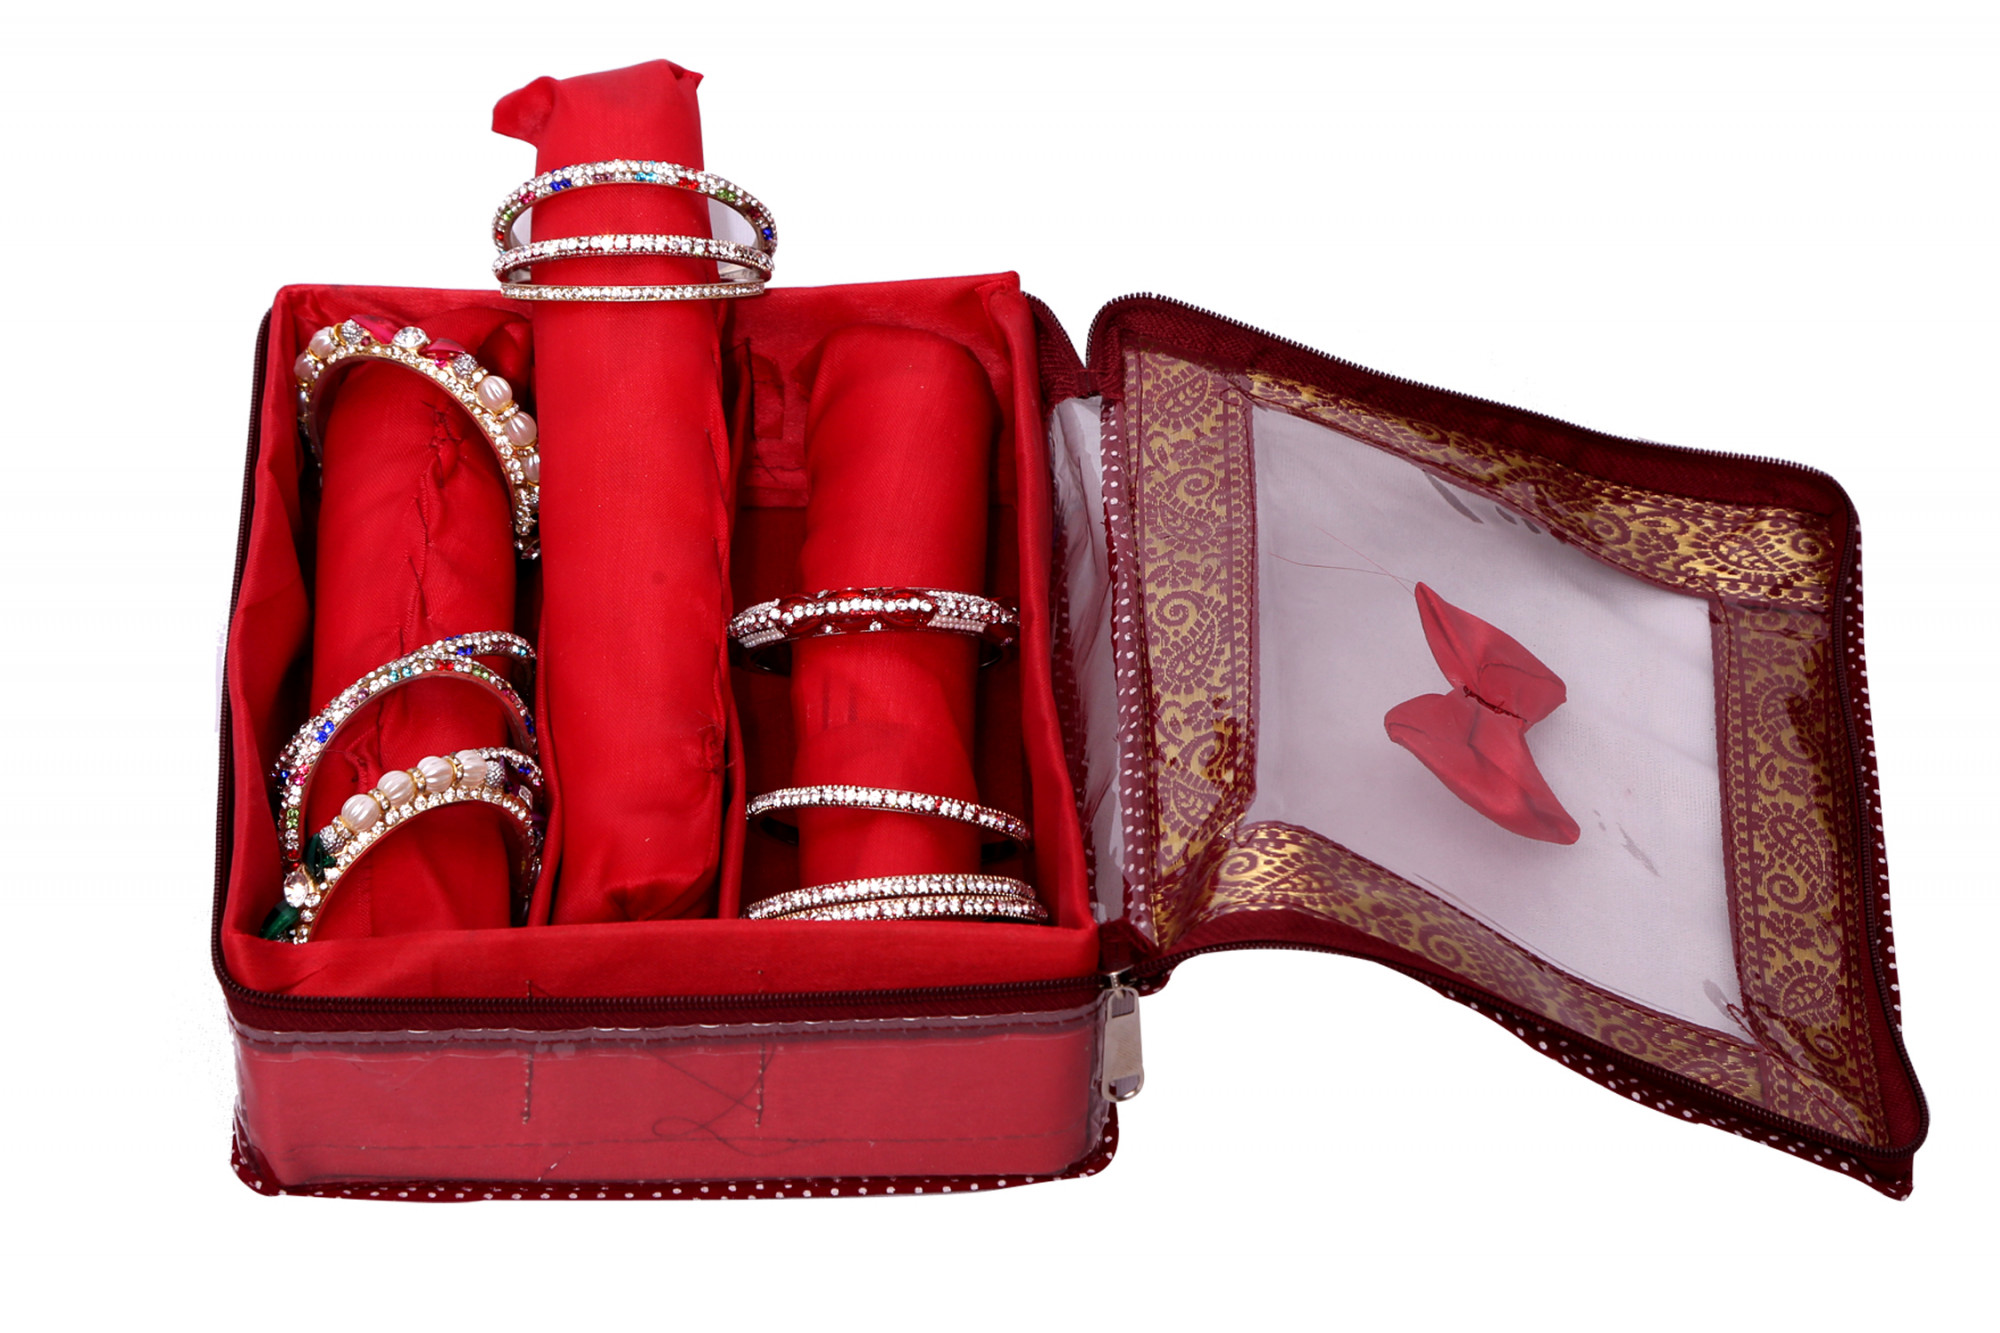 Kuber Industries Zipper Bangle Organiser with 3 Rods Jewellery Pouch Vanity Bag Organizer for Women and Girls (Maroon)